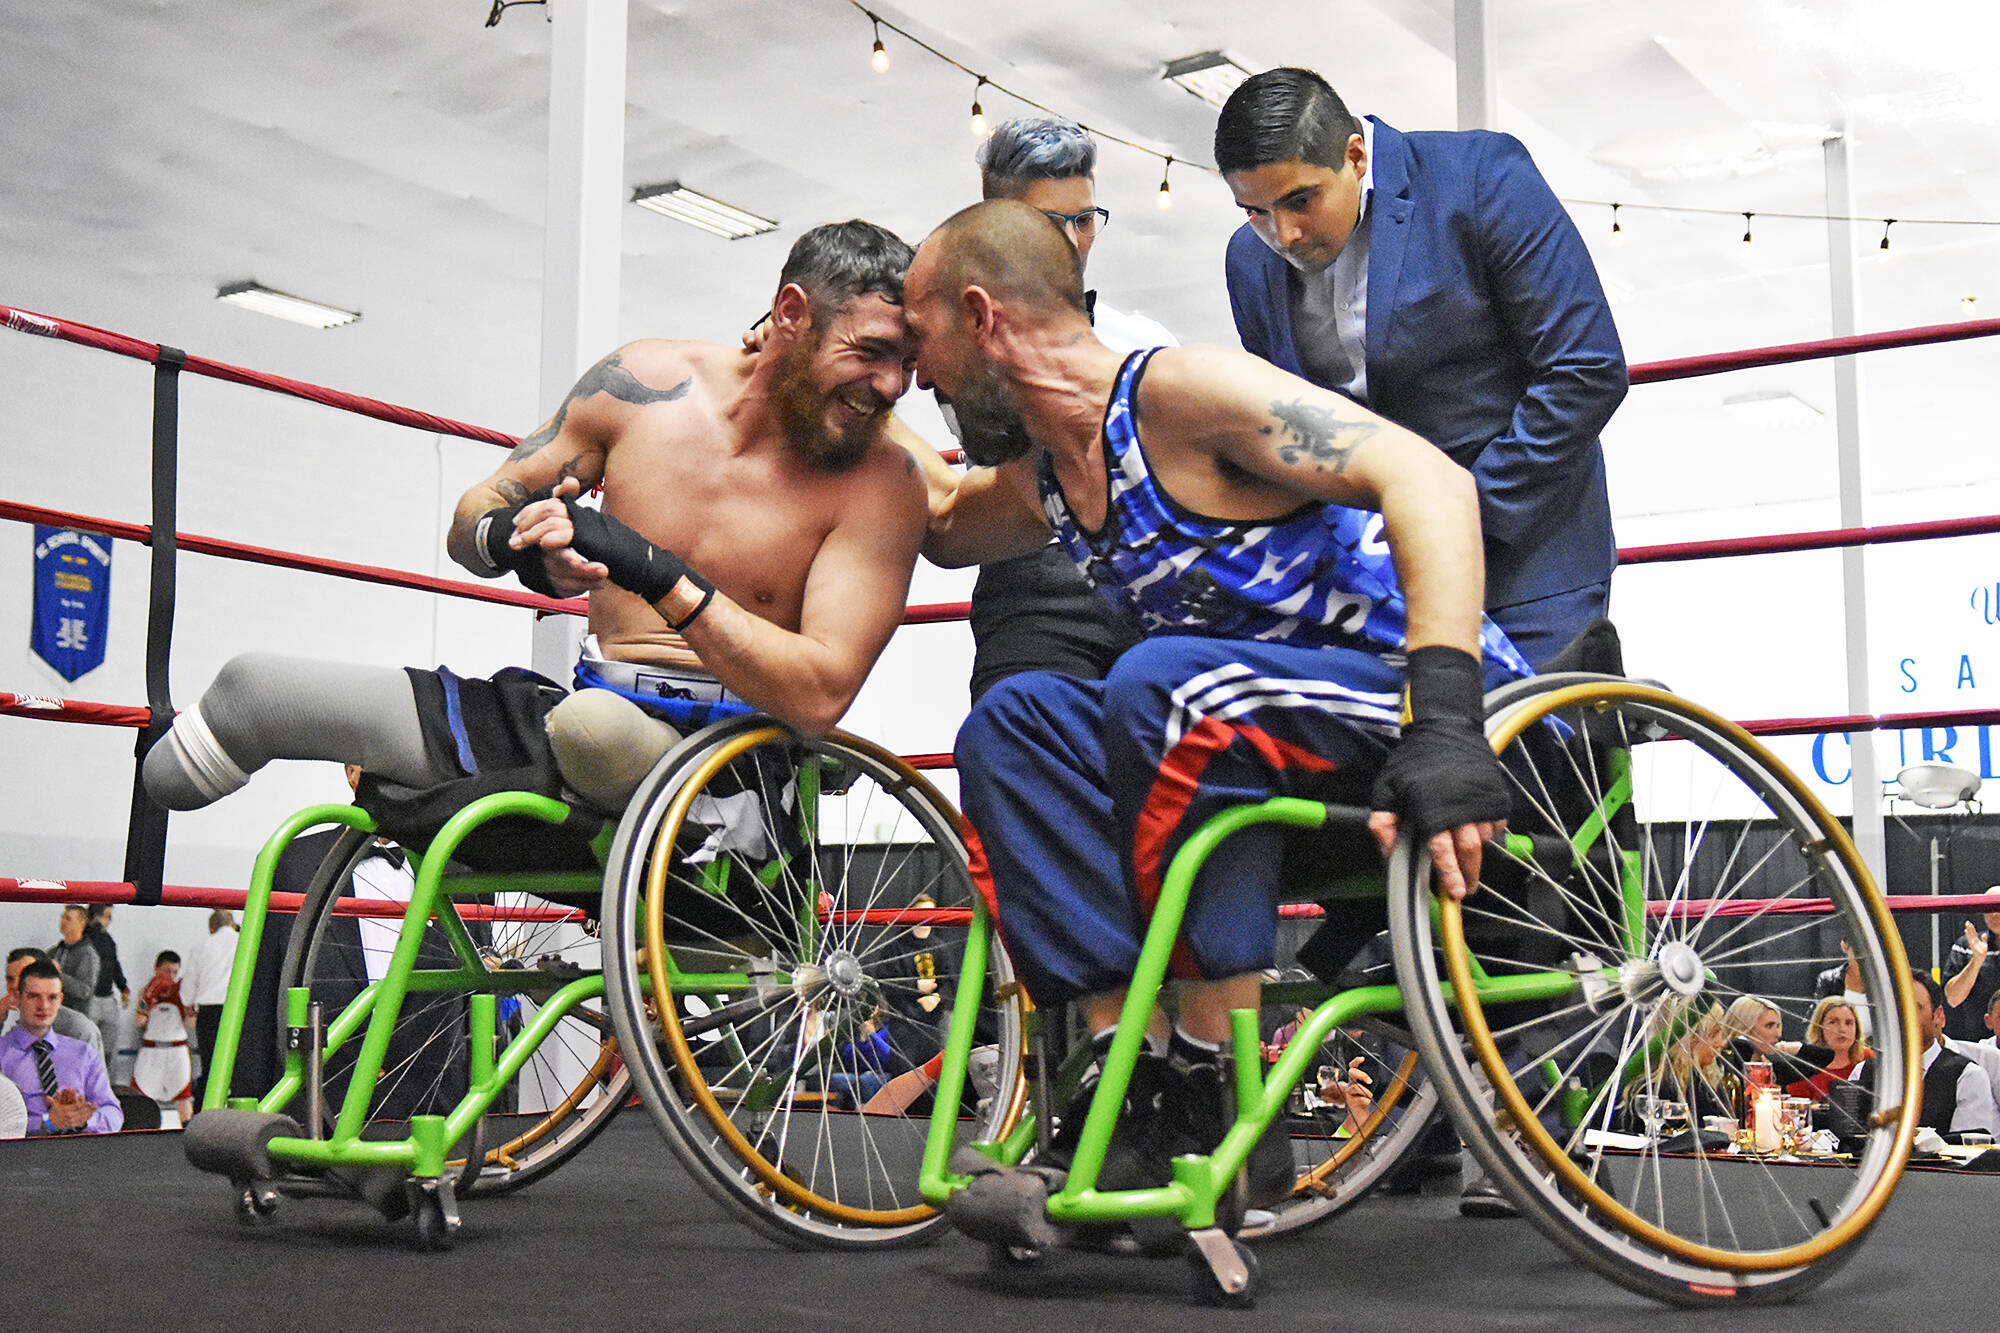 Brits Chris Middleton of Newcastle and Colin Woods of Leicester await the result of their adaptive boxing exhibition bout, the first fight of the 2019 Hit 2 Fit event. (File photo)